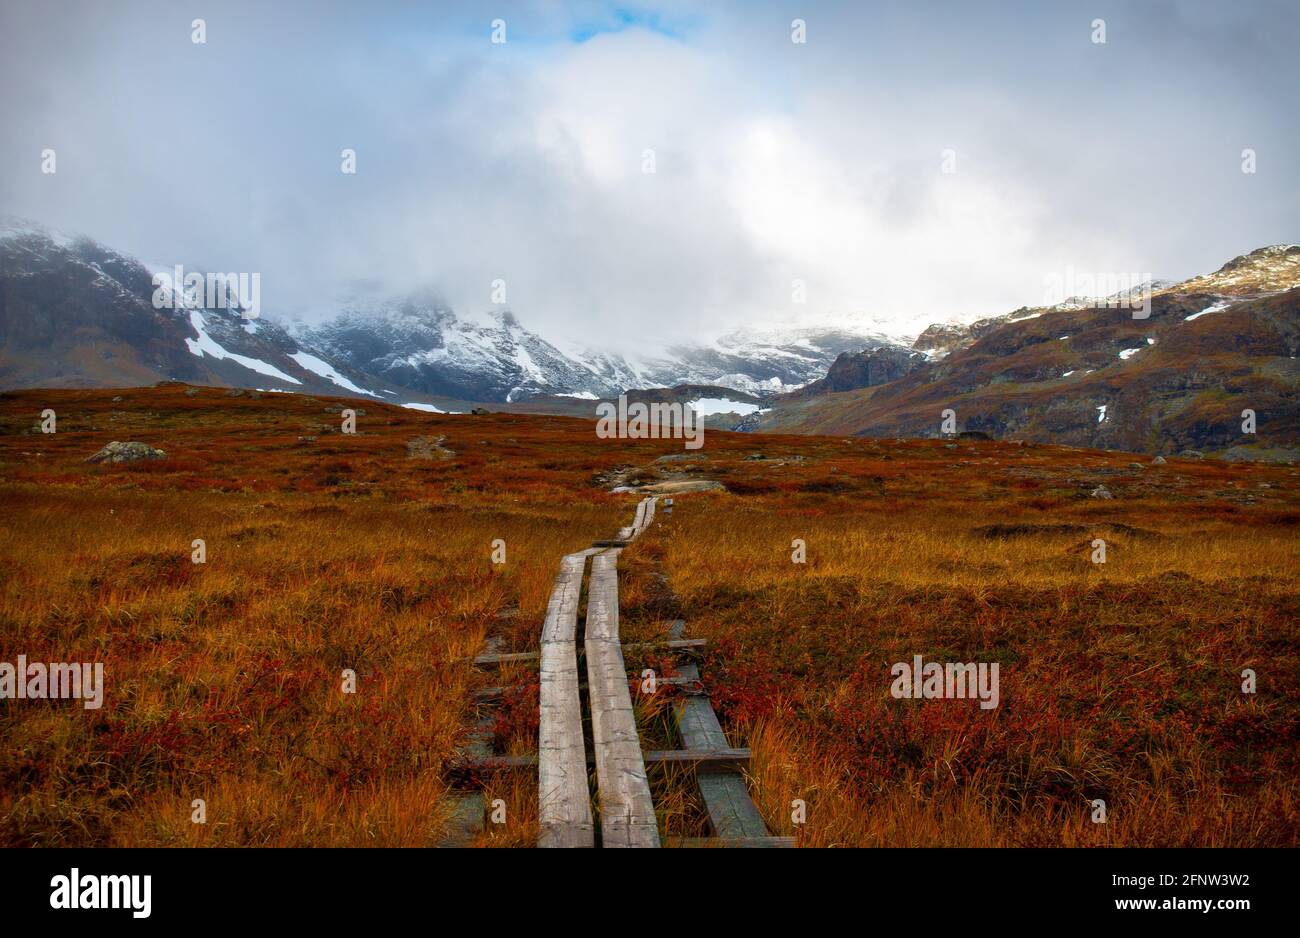 Swampy parts of Kungsleden trail with a wooden path, hiking in September, Lapland, Sweden Stock Photo